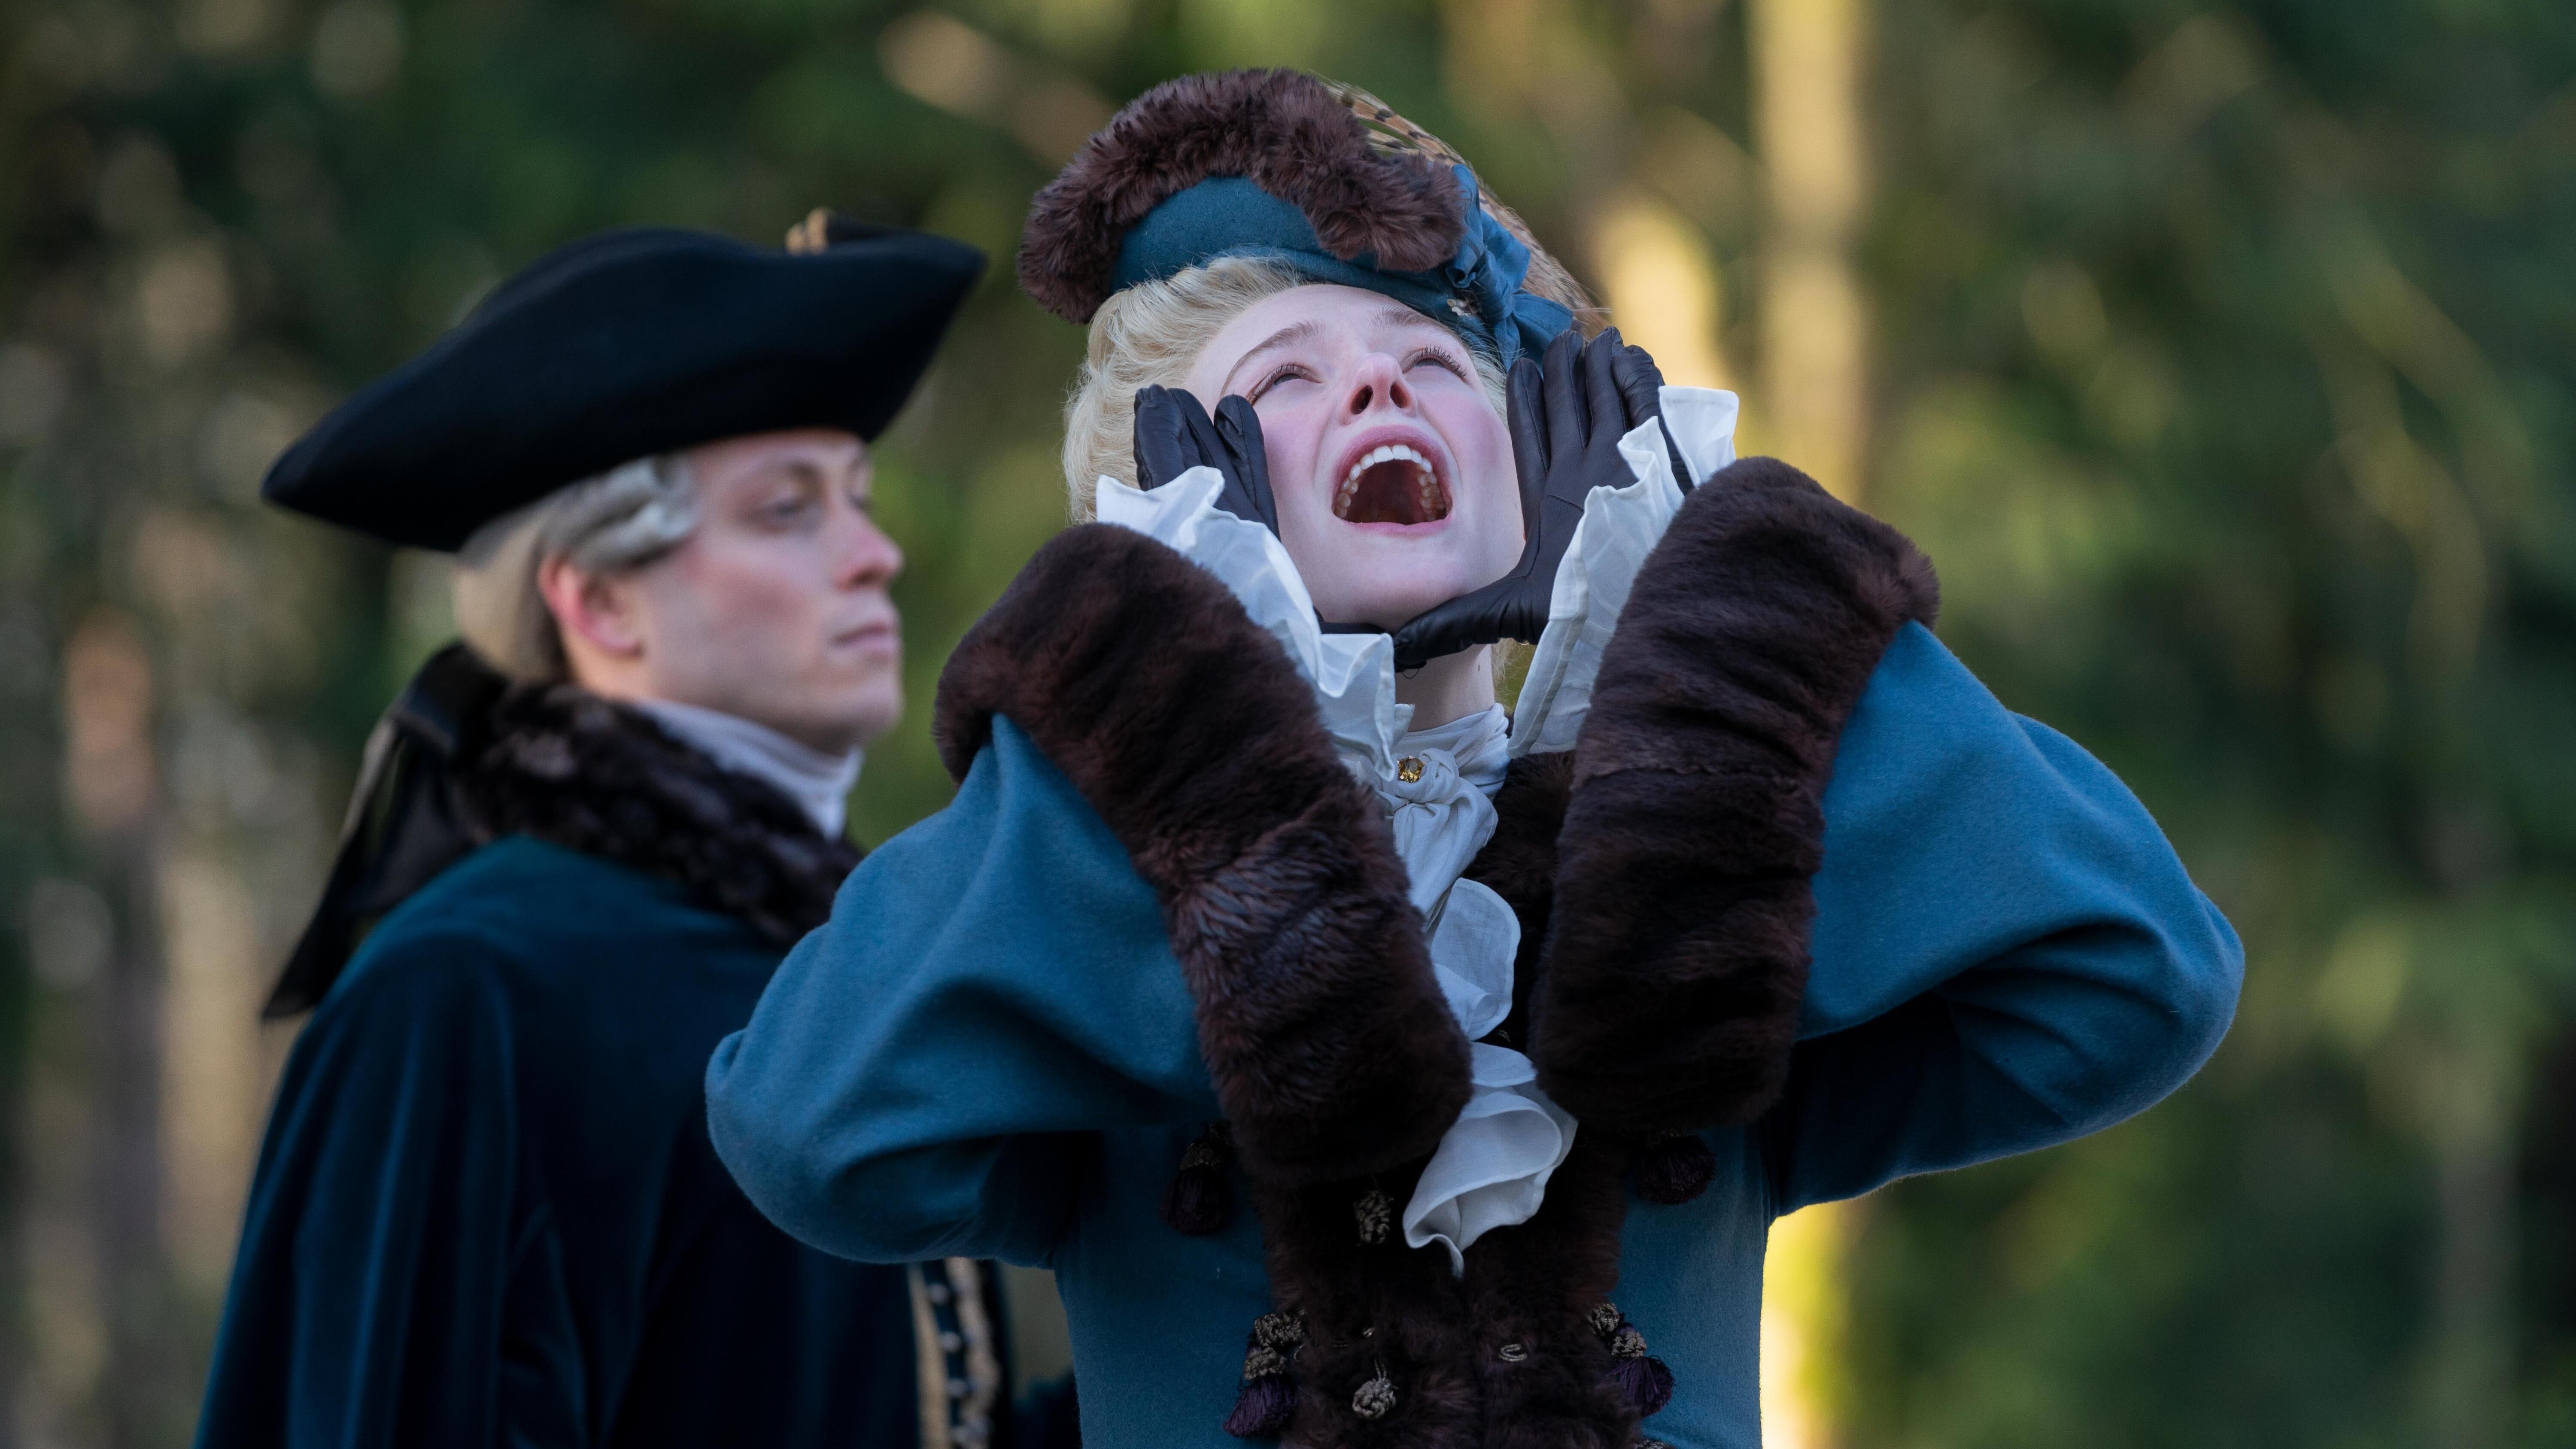 Let Elle Fanning and Nicholas Hoult teach you the ins and outs of The Great‘s “Huzzah!”